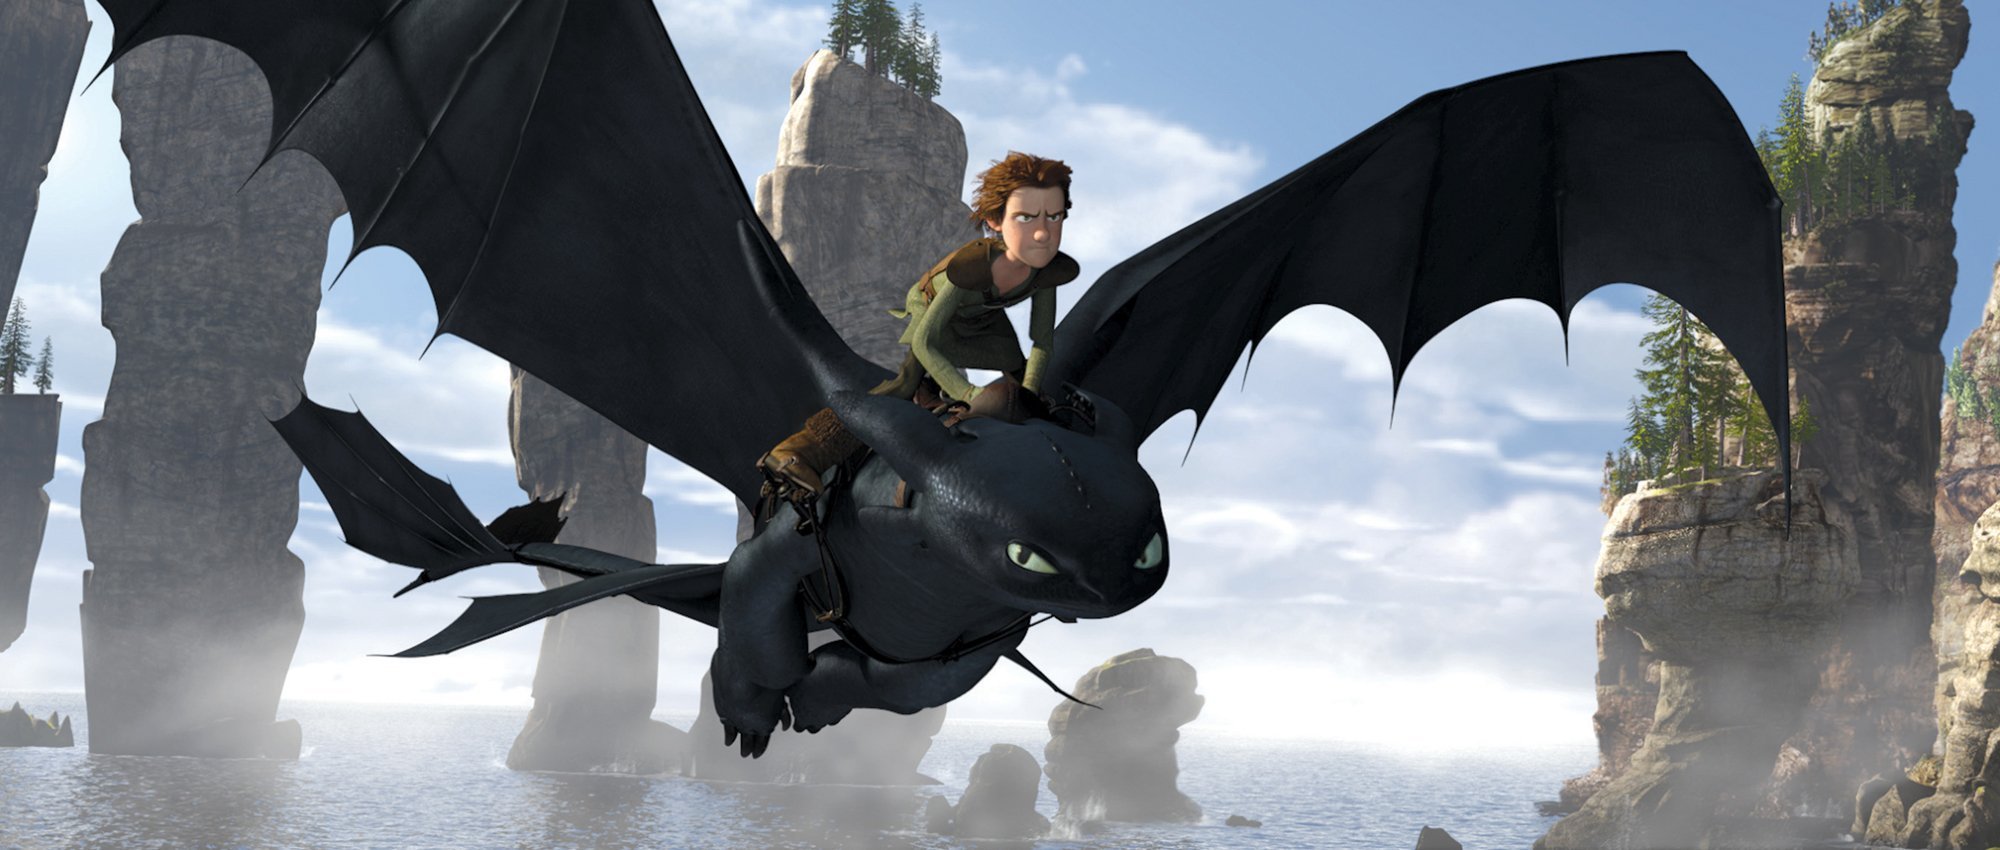 How to Train Your Dragon Toothless Wallpaper